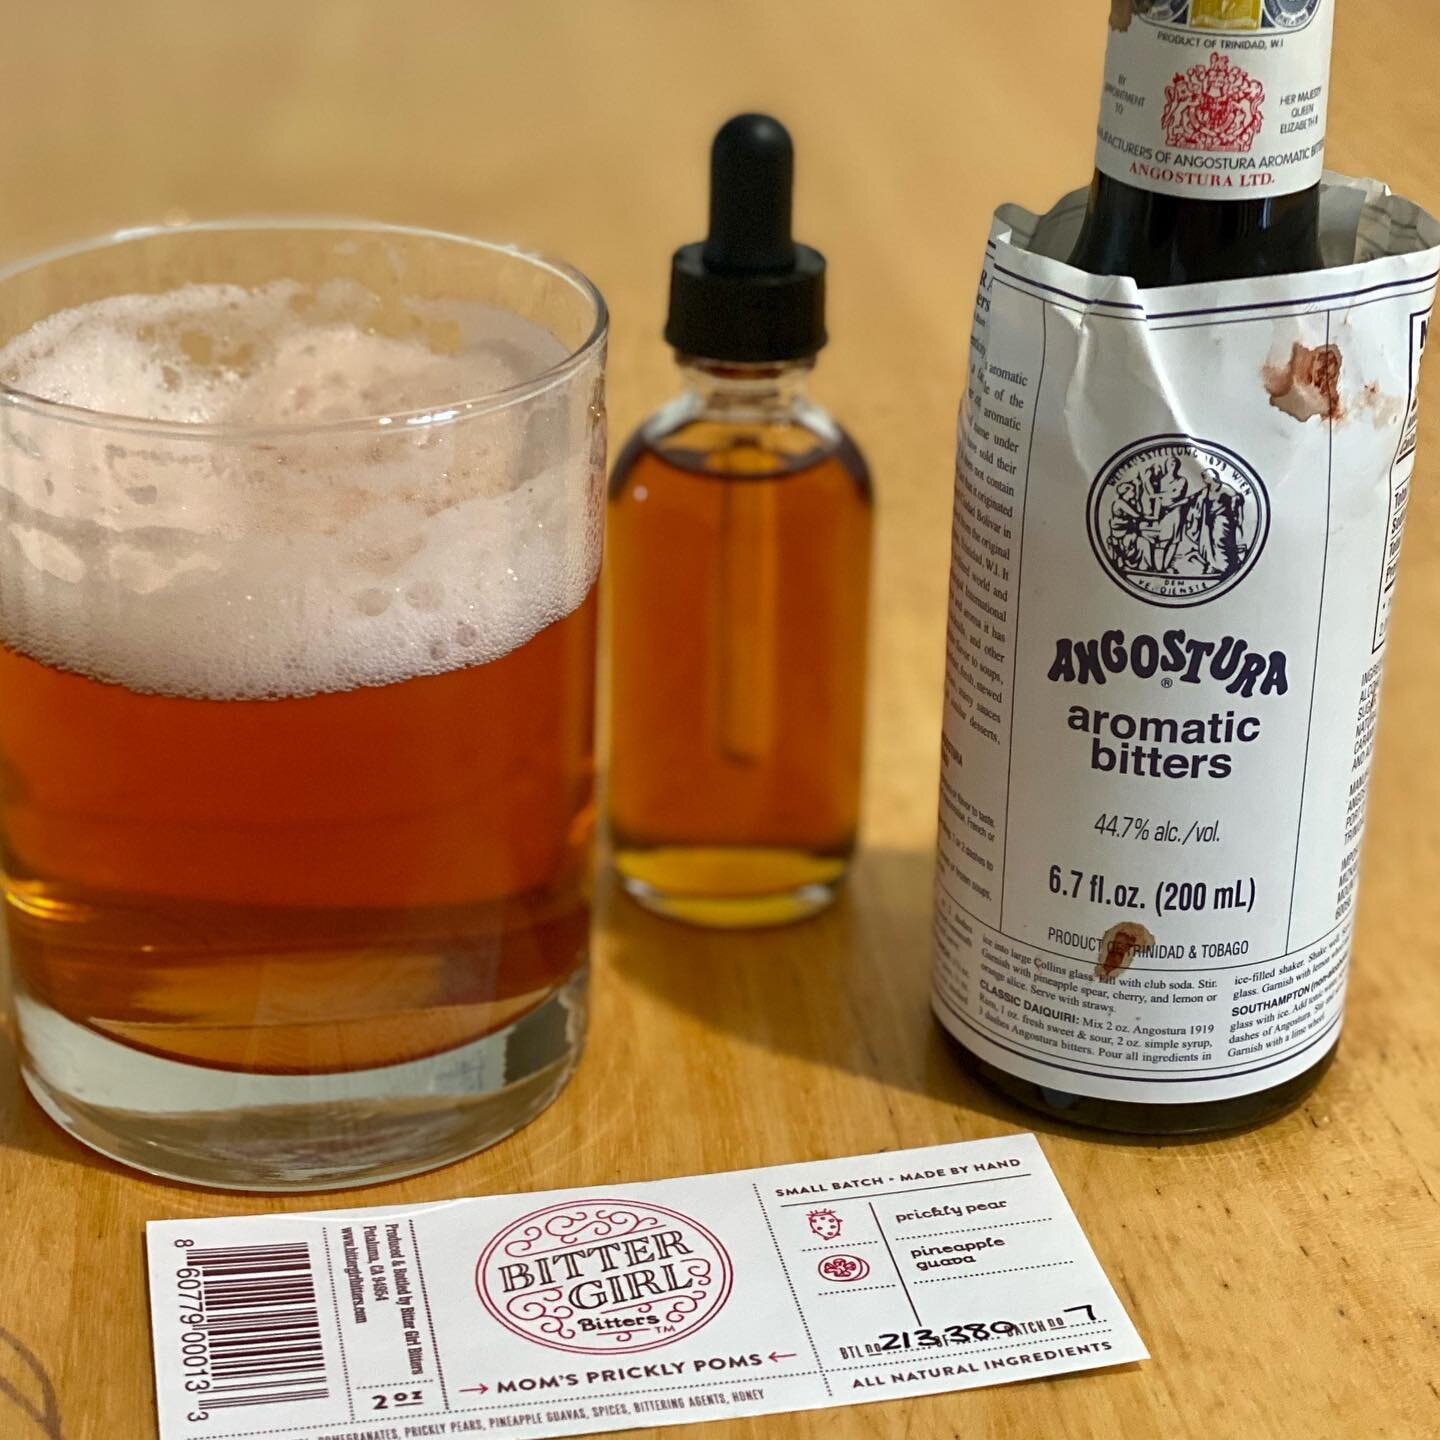 Confession - I love Angostura Bitters and soda. 

Having a sensitive stomach my whole life, I was so excited to find a remedy through becoming a bartender. It was either Angostura or Fernet? 🤷🏼&zwj;♀️

These days it&rsquo;s mostly the Angostura or 